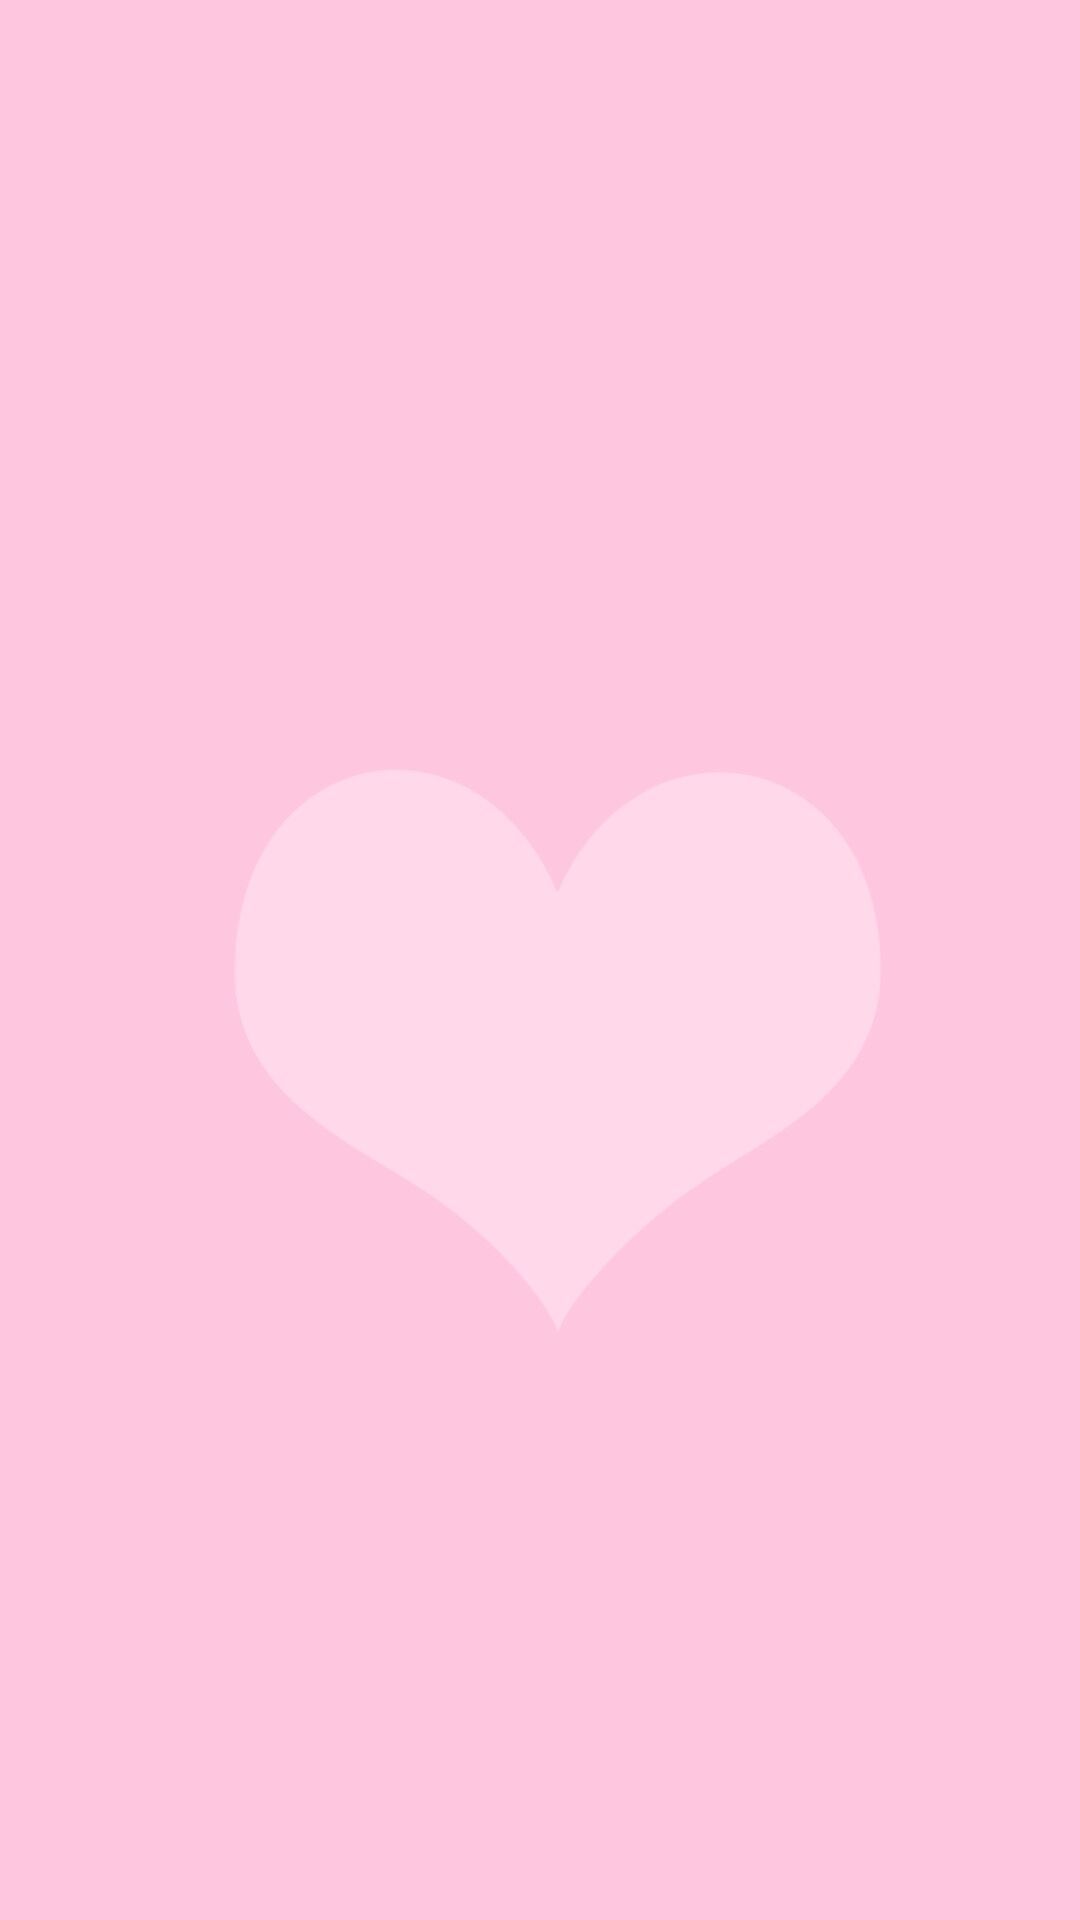 10 Top pink aesthetic wallpaper heart You Can Get It free - Aesthetic Arena